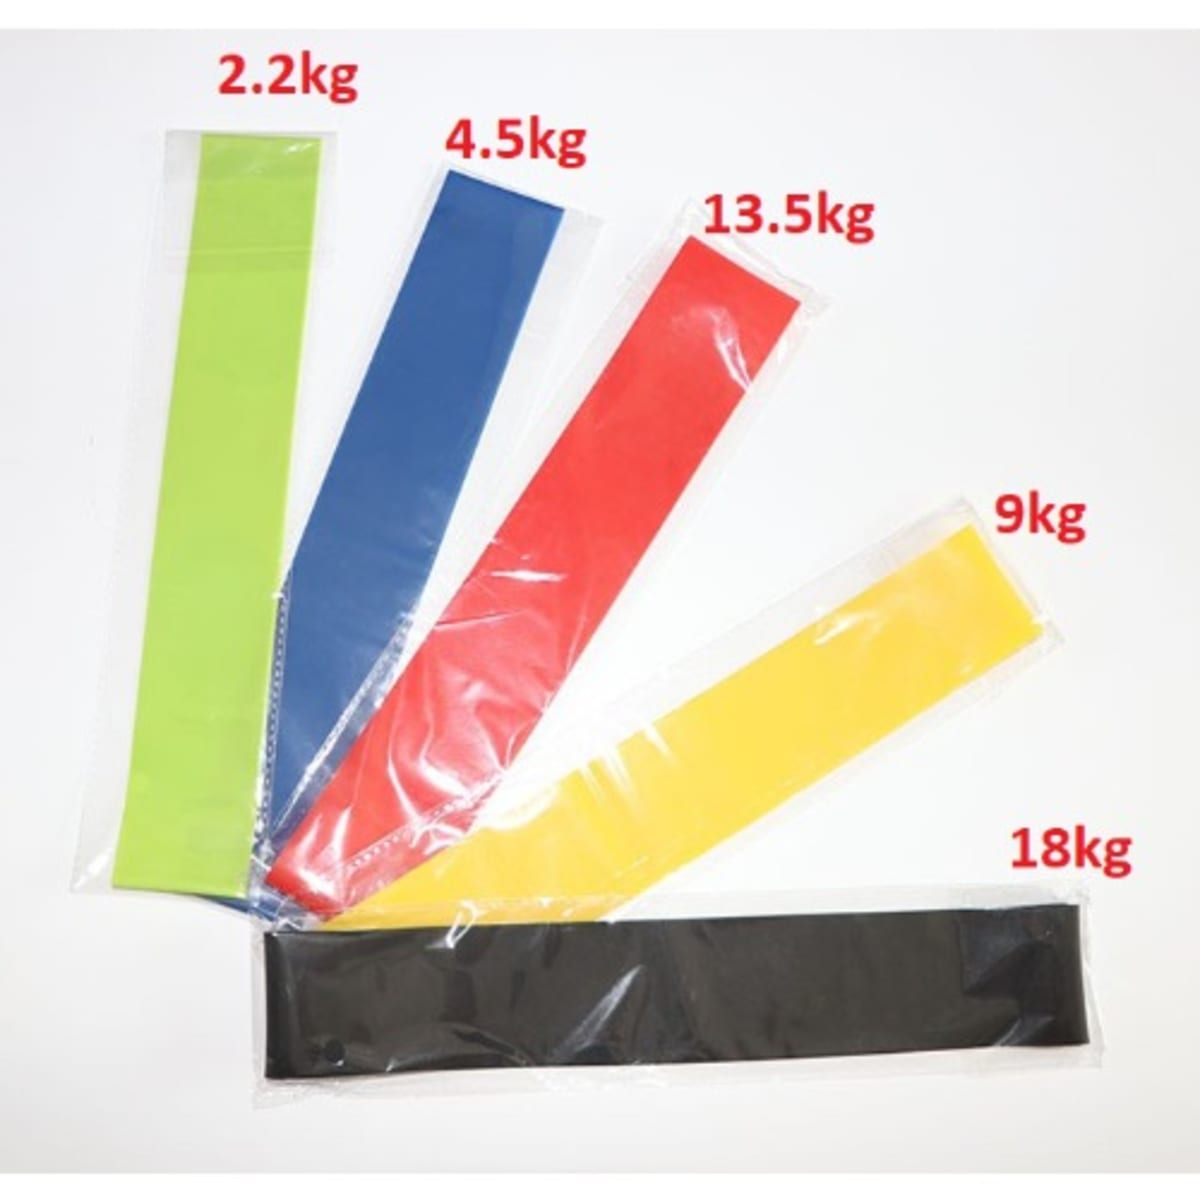 Generic Resistance Bands Fitness Exercise Bands Elastic Set 5 In 1